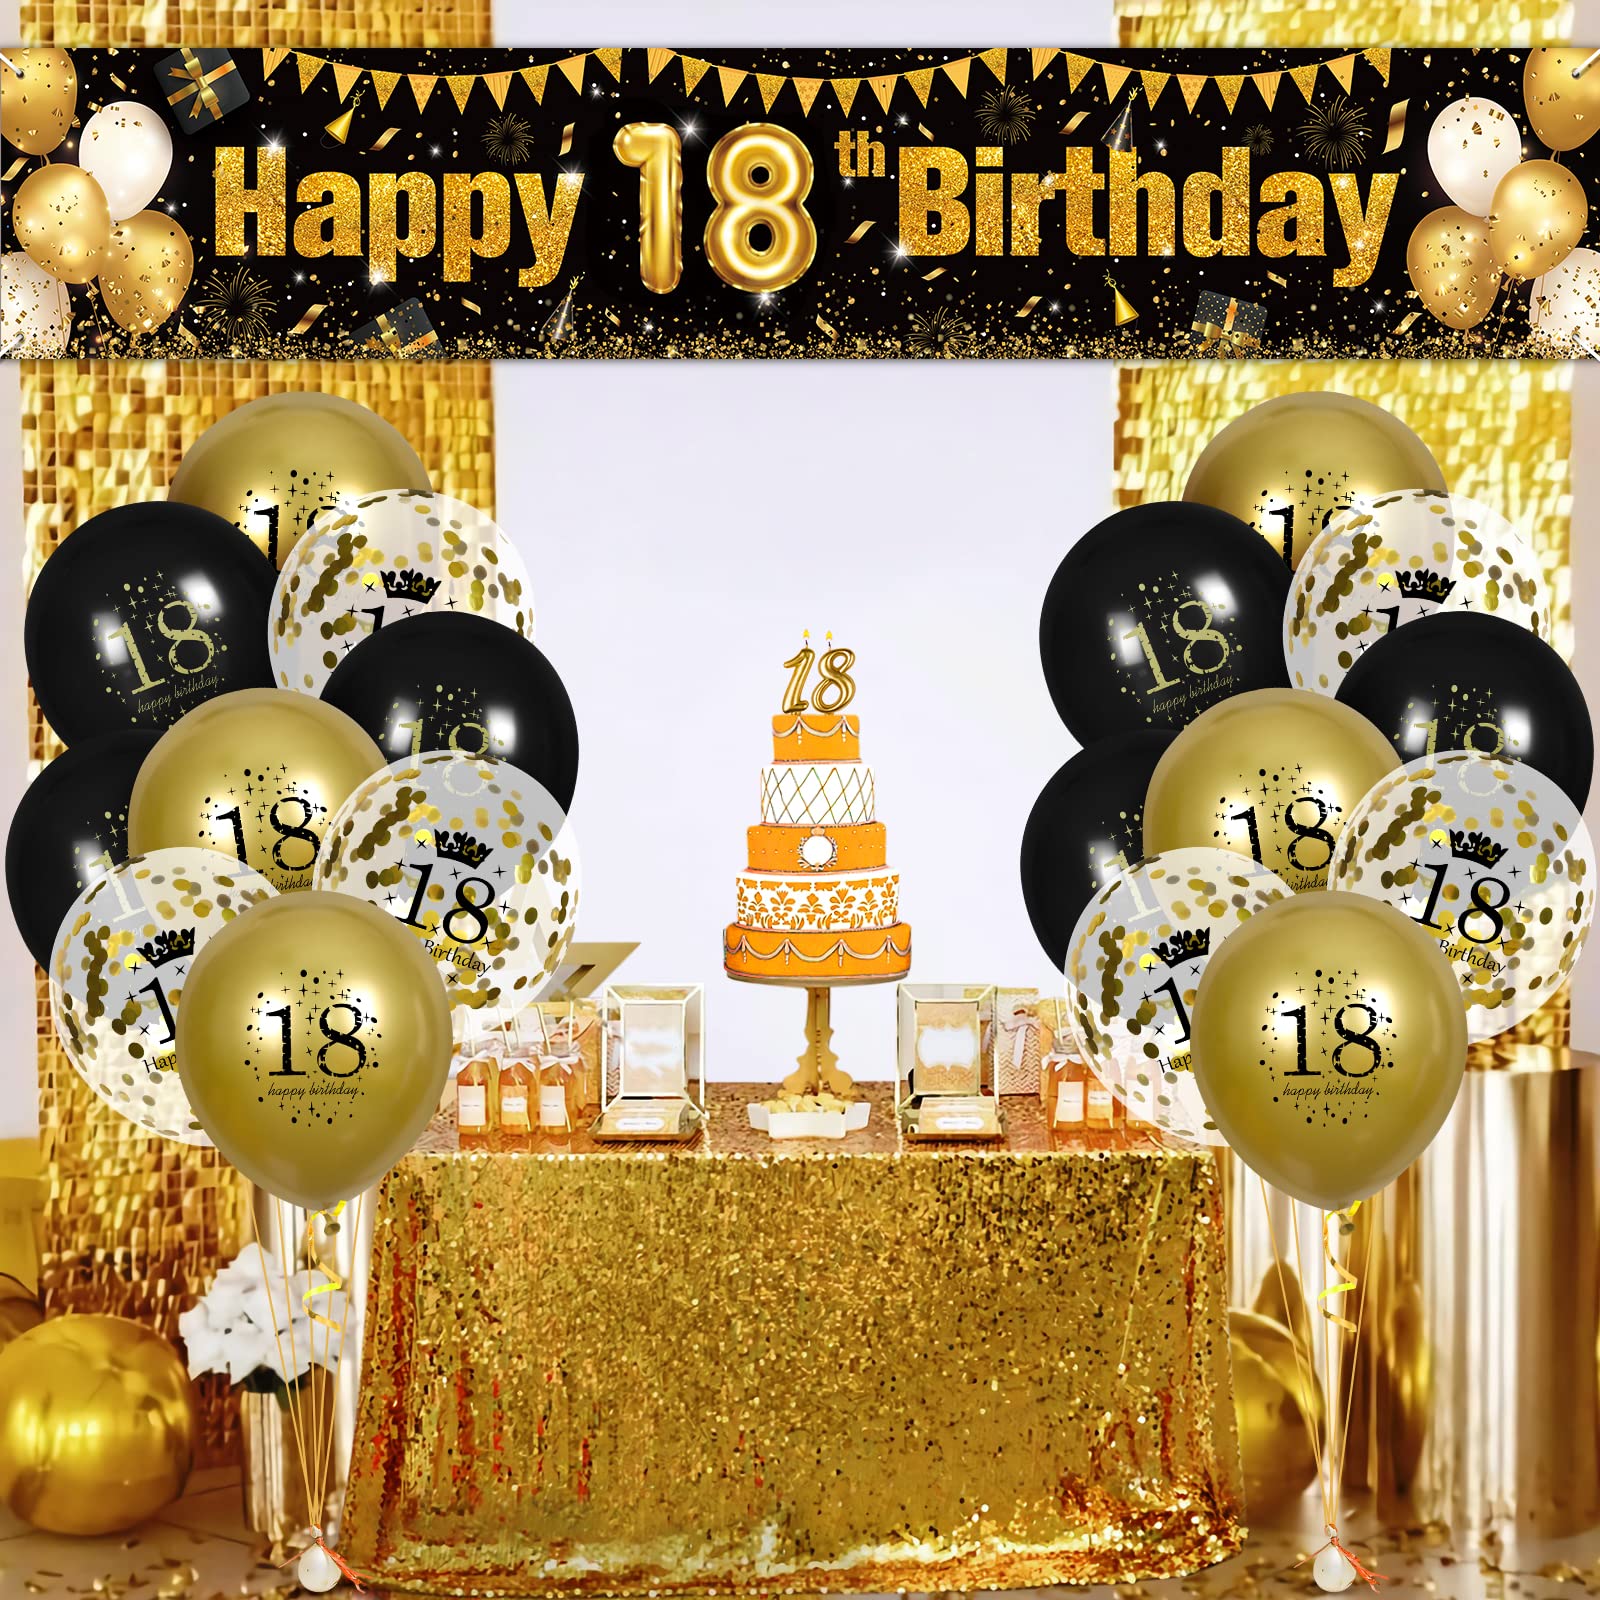 18th Birthday Decorations for Boys Girls and Gold, Black Gold Birthday Yard Banner Sign and 18PCS 18th Happy Birthday Confetti Balloons for 18th Anniversary Birthday Party Supplies Outdoor Yard Decor